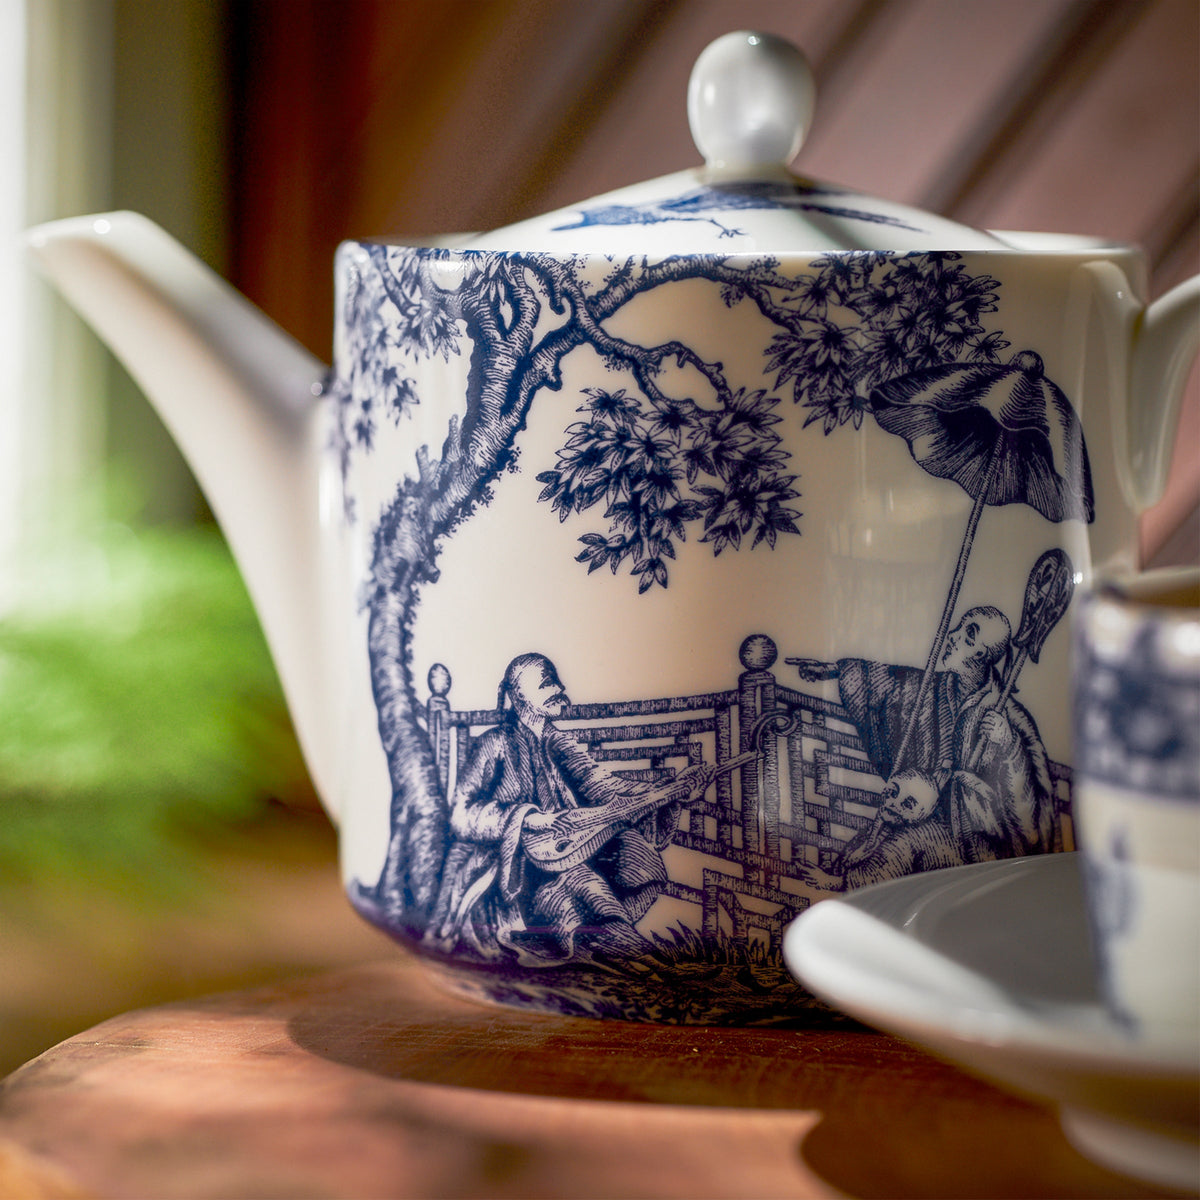 A Chinoiserie Toile Petite Teapot by Caskata and a bone china cup on a table.